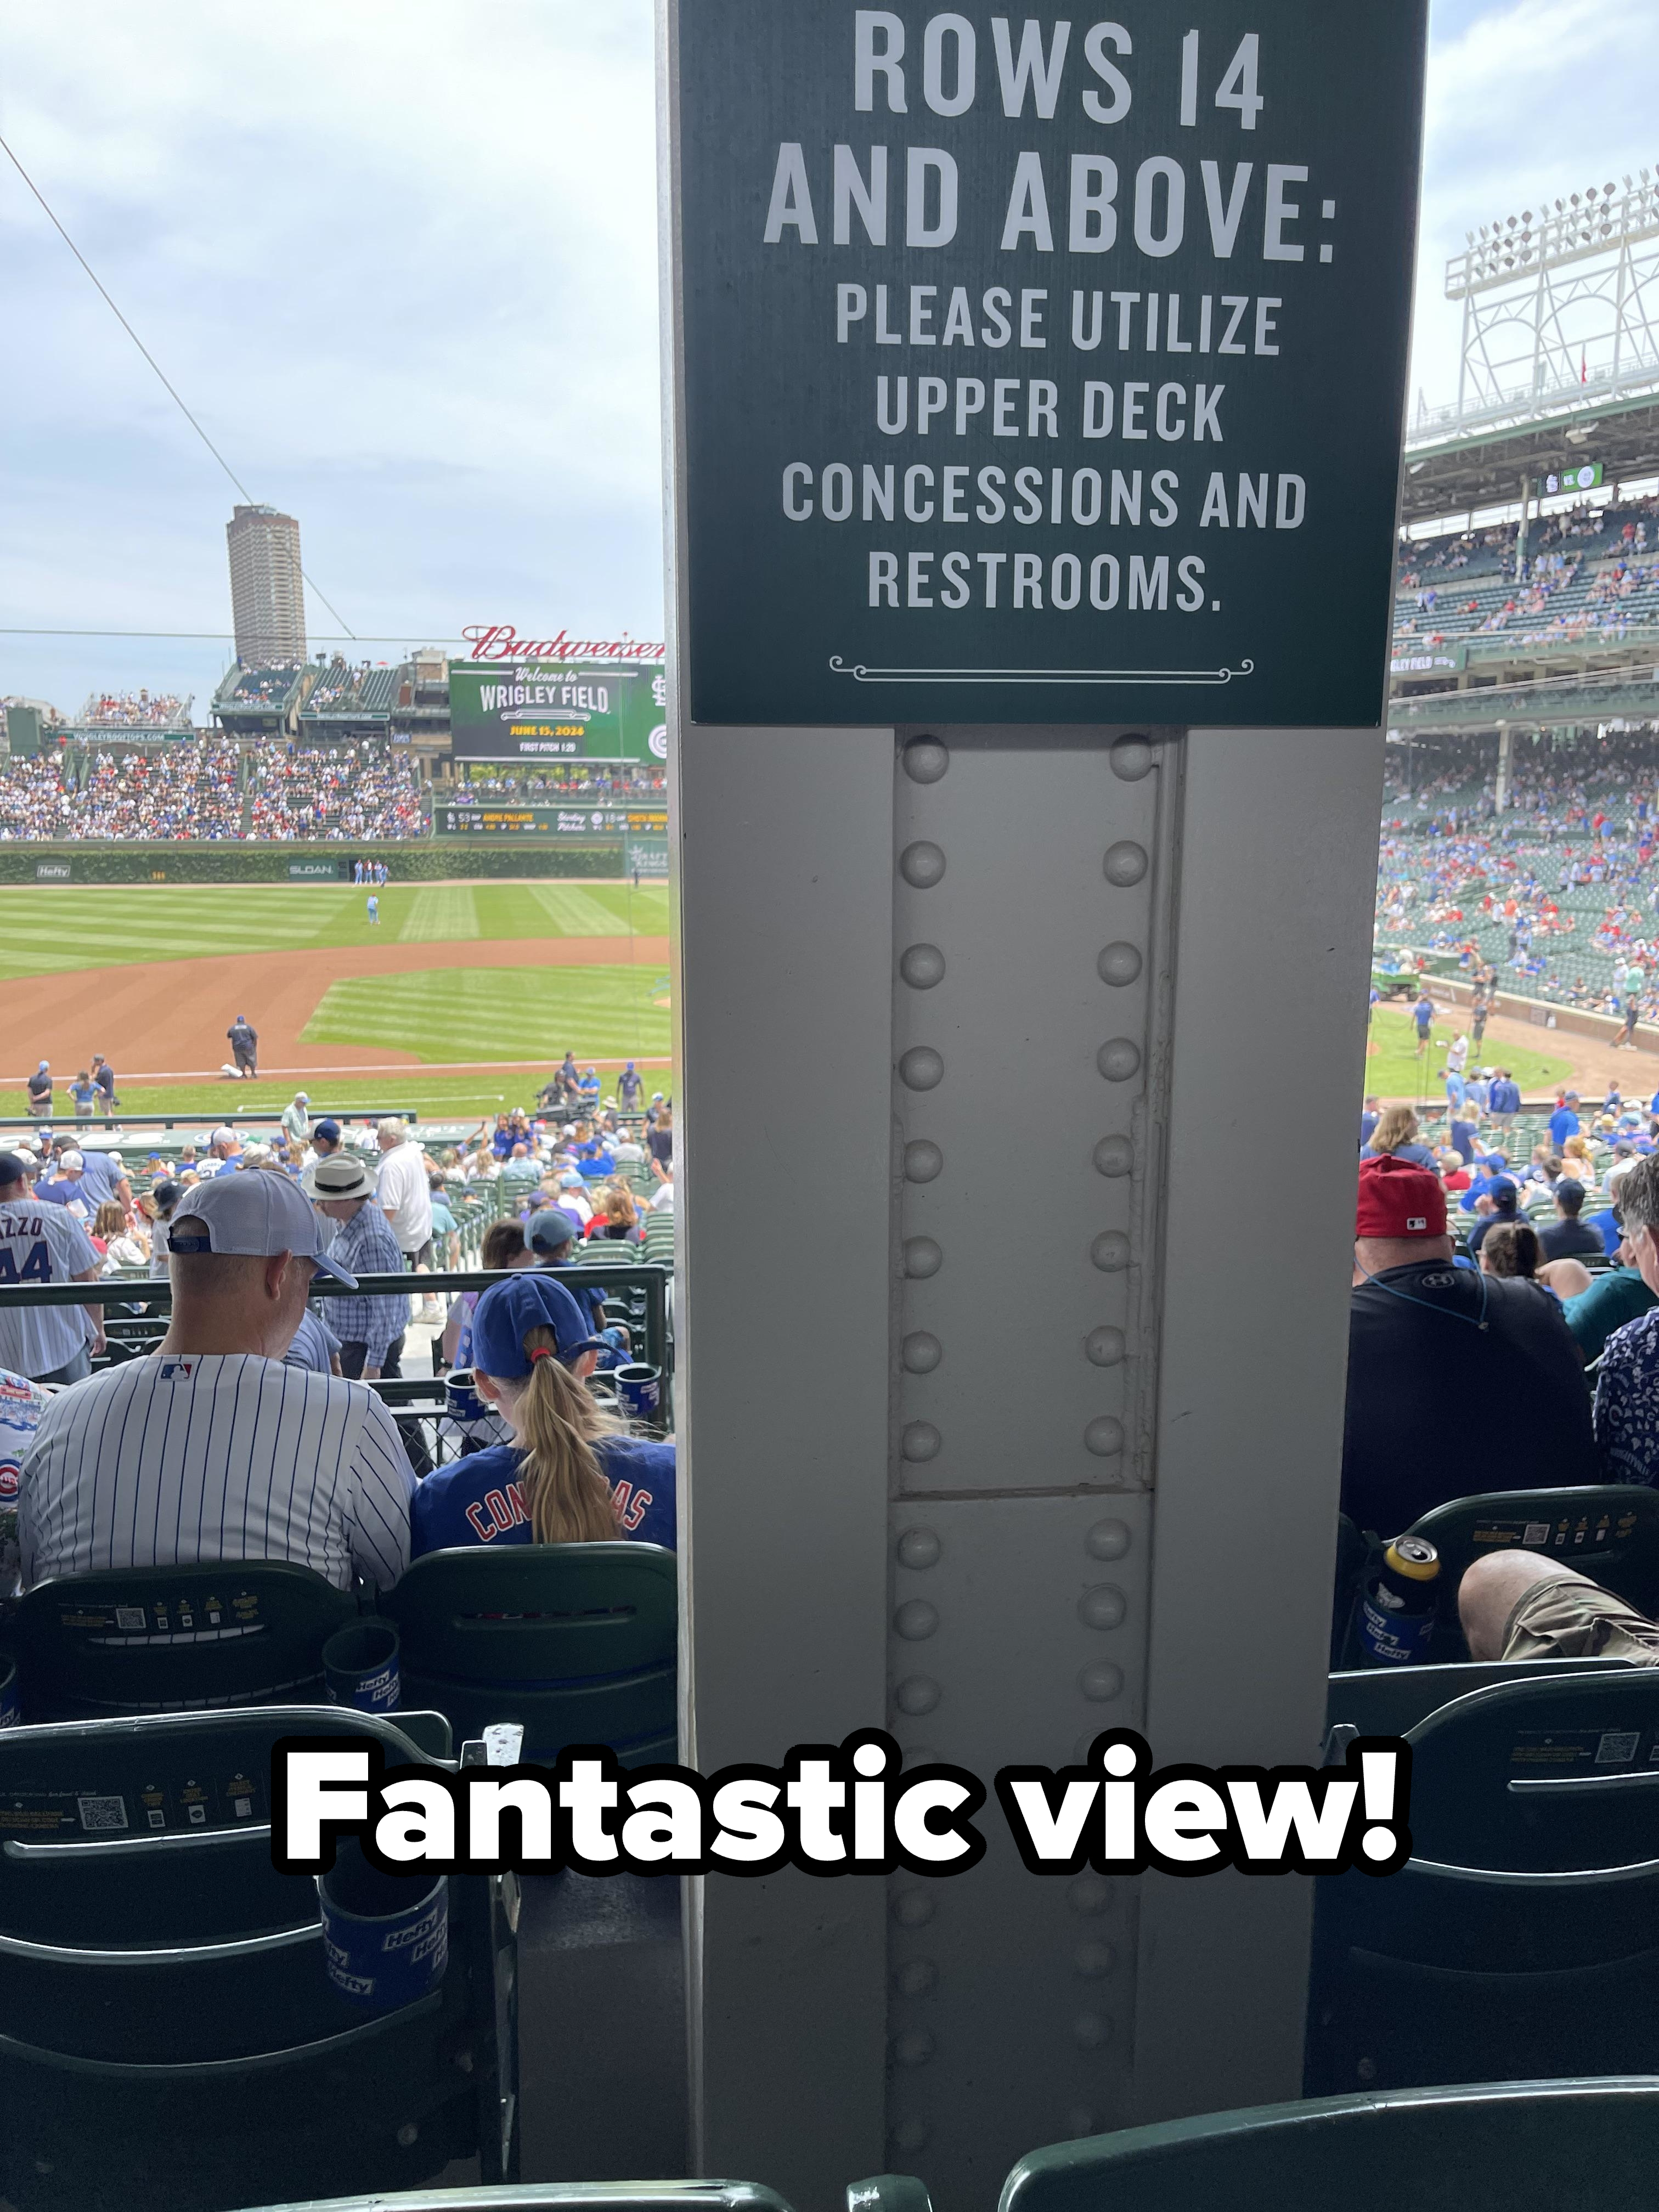 A sign at a baseball game says, &quot;Rows 14 and above: Please utilize upper deck concessions and restrooms.&quot; Fans are seated in the stadium, and the game is ongoing